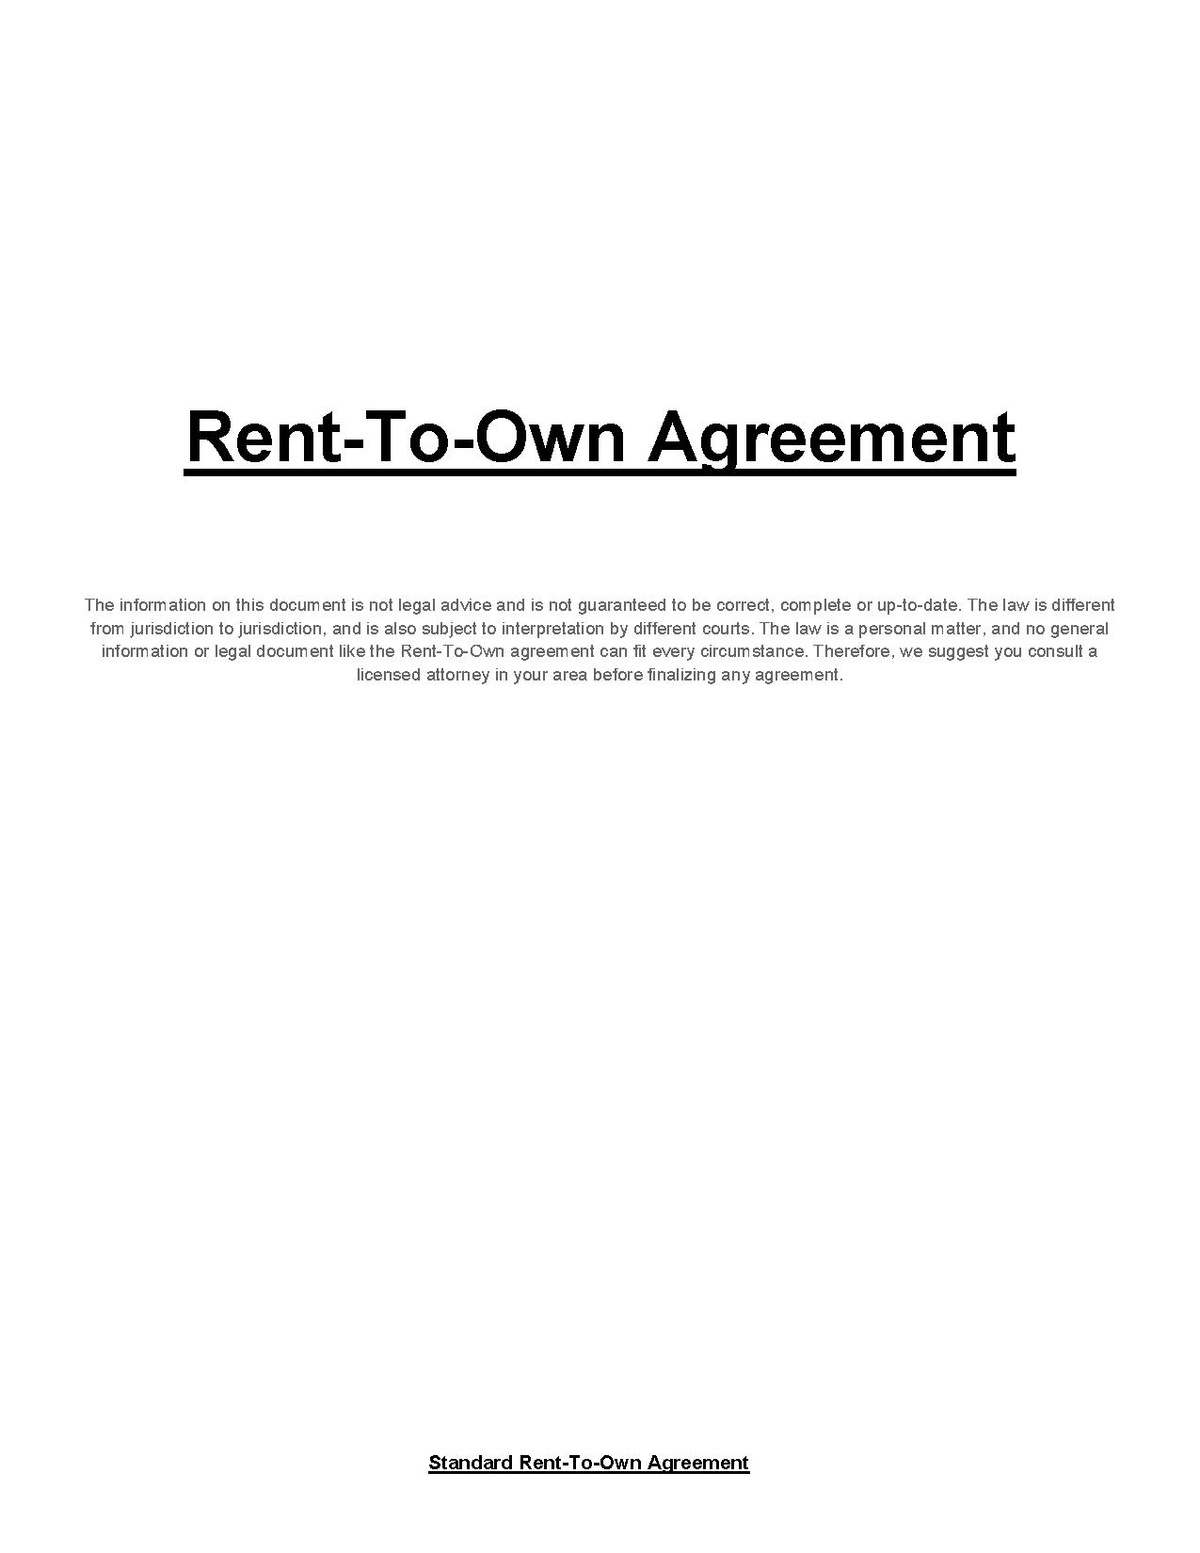 Business Transfer Agreement Rent To Own Wikipedia